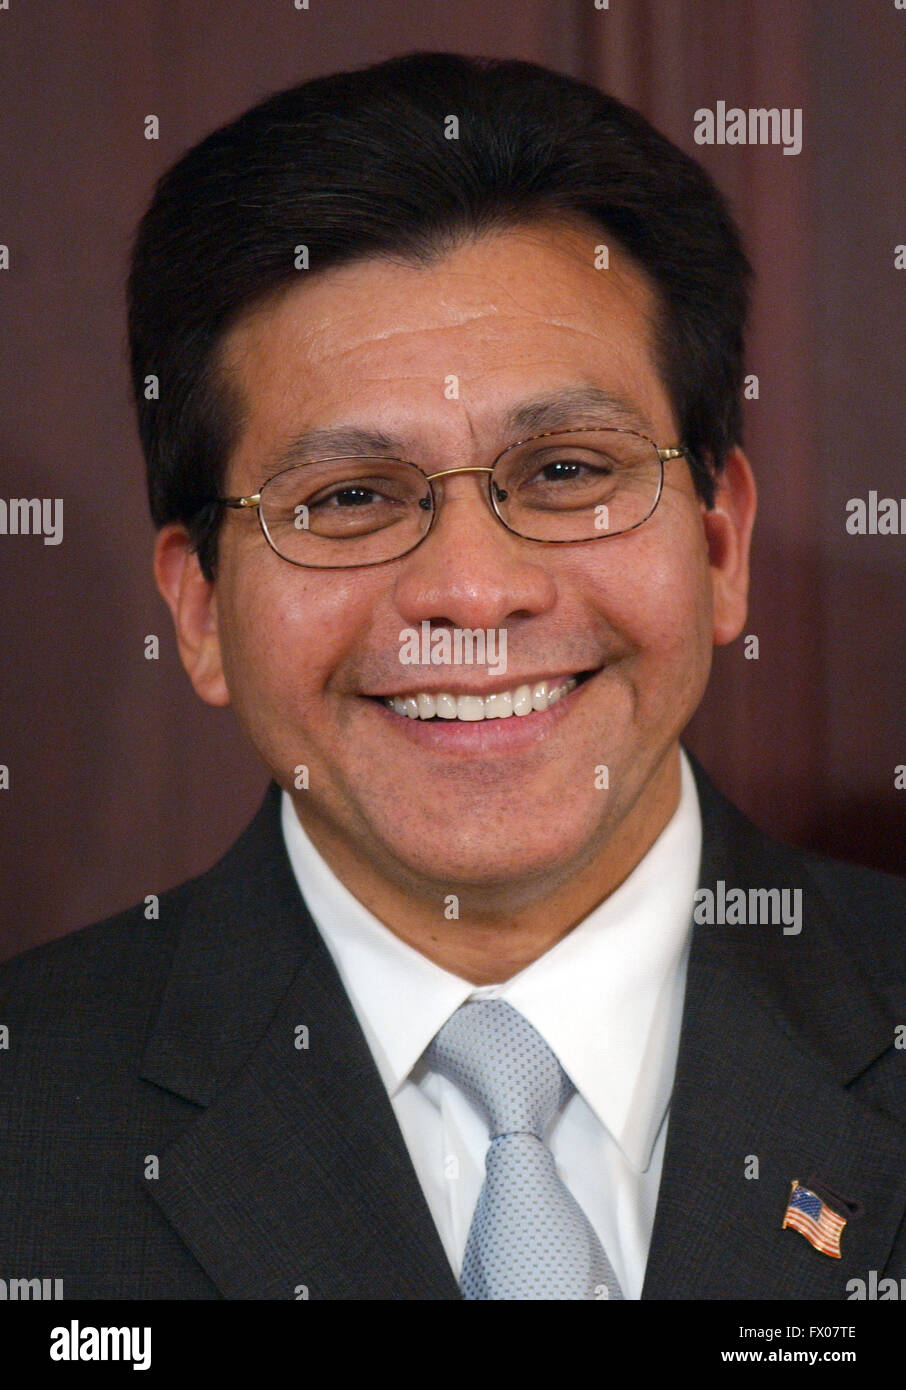 Washington, District of Columbia, USA. 20th Apr, 2005. Washington, DC - April 20, 2005 -- United States Attorney General Alberto Gonzales attends the signing of the Bankruptcy Reform Bill in Washington, DC on April 20, 2005. Credit: Ron Sachs/CNP © Ron Sachs/CNP/ZUMA Wire/Alamy Live News Stock Photo